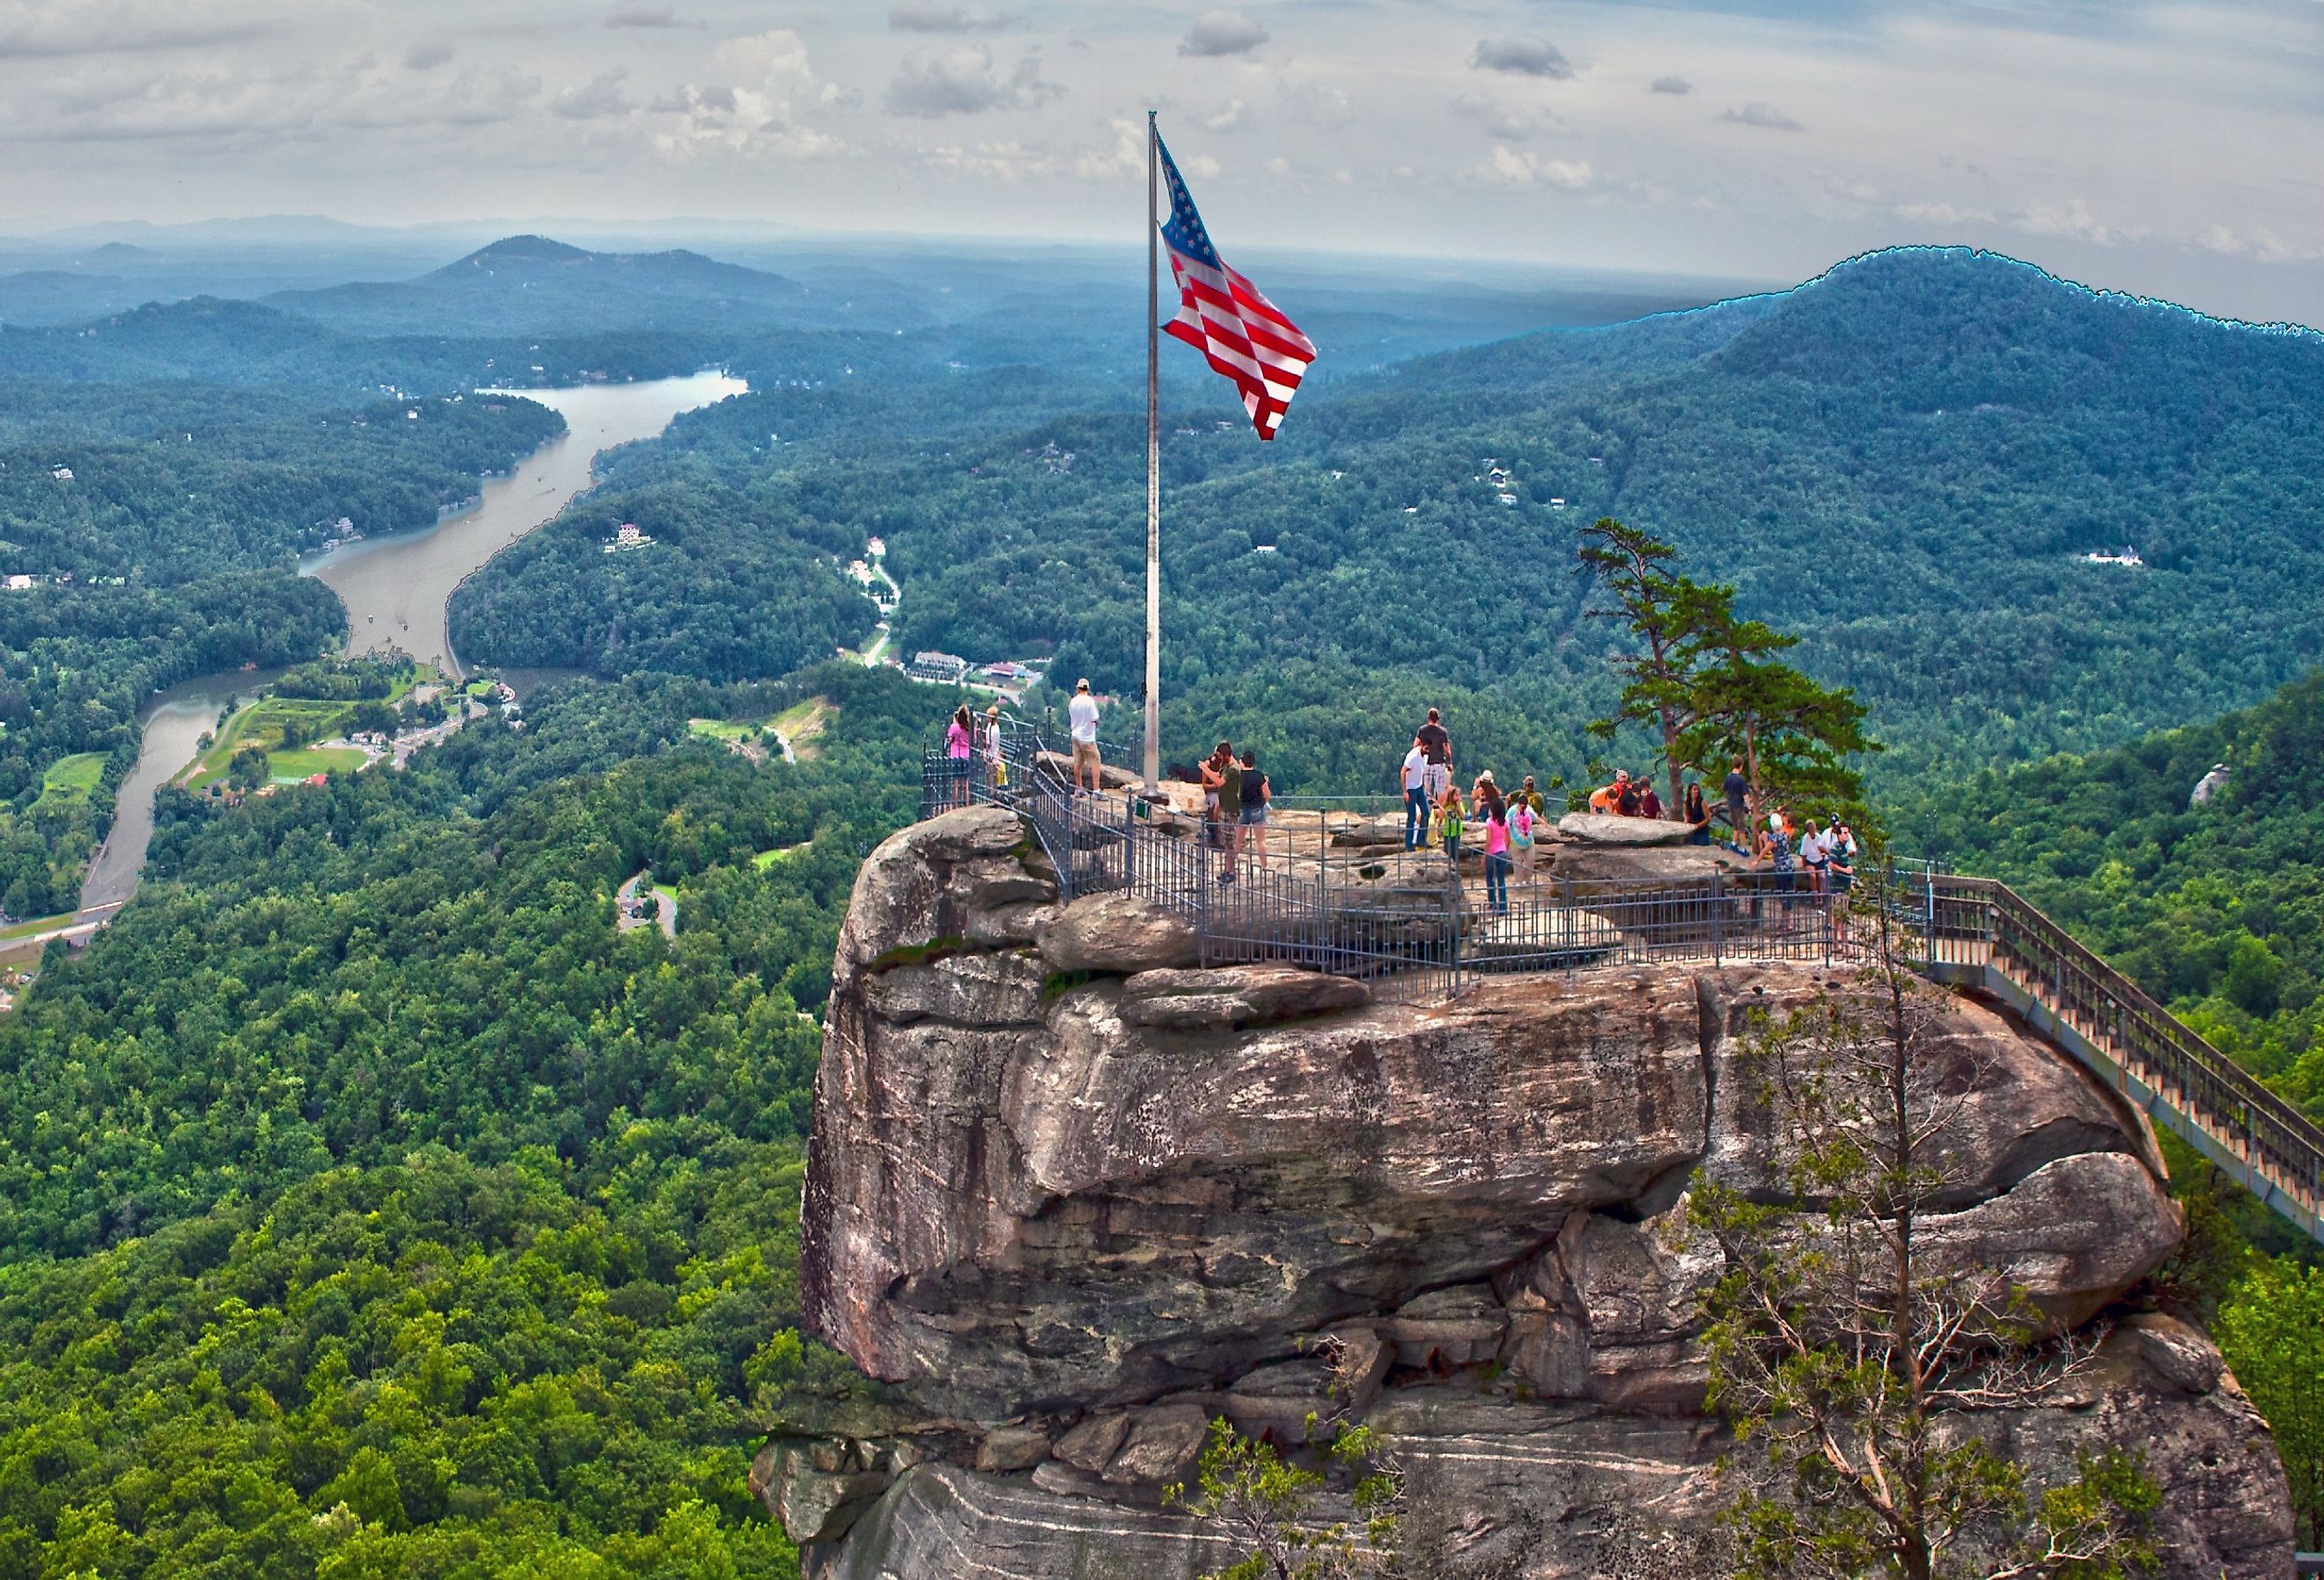 The view from the top of Chimney Rock, North Carolina.